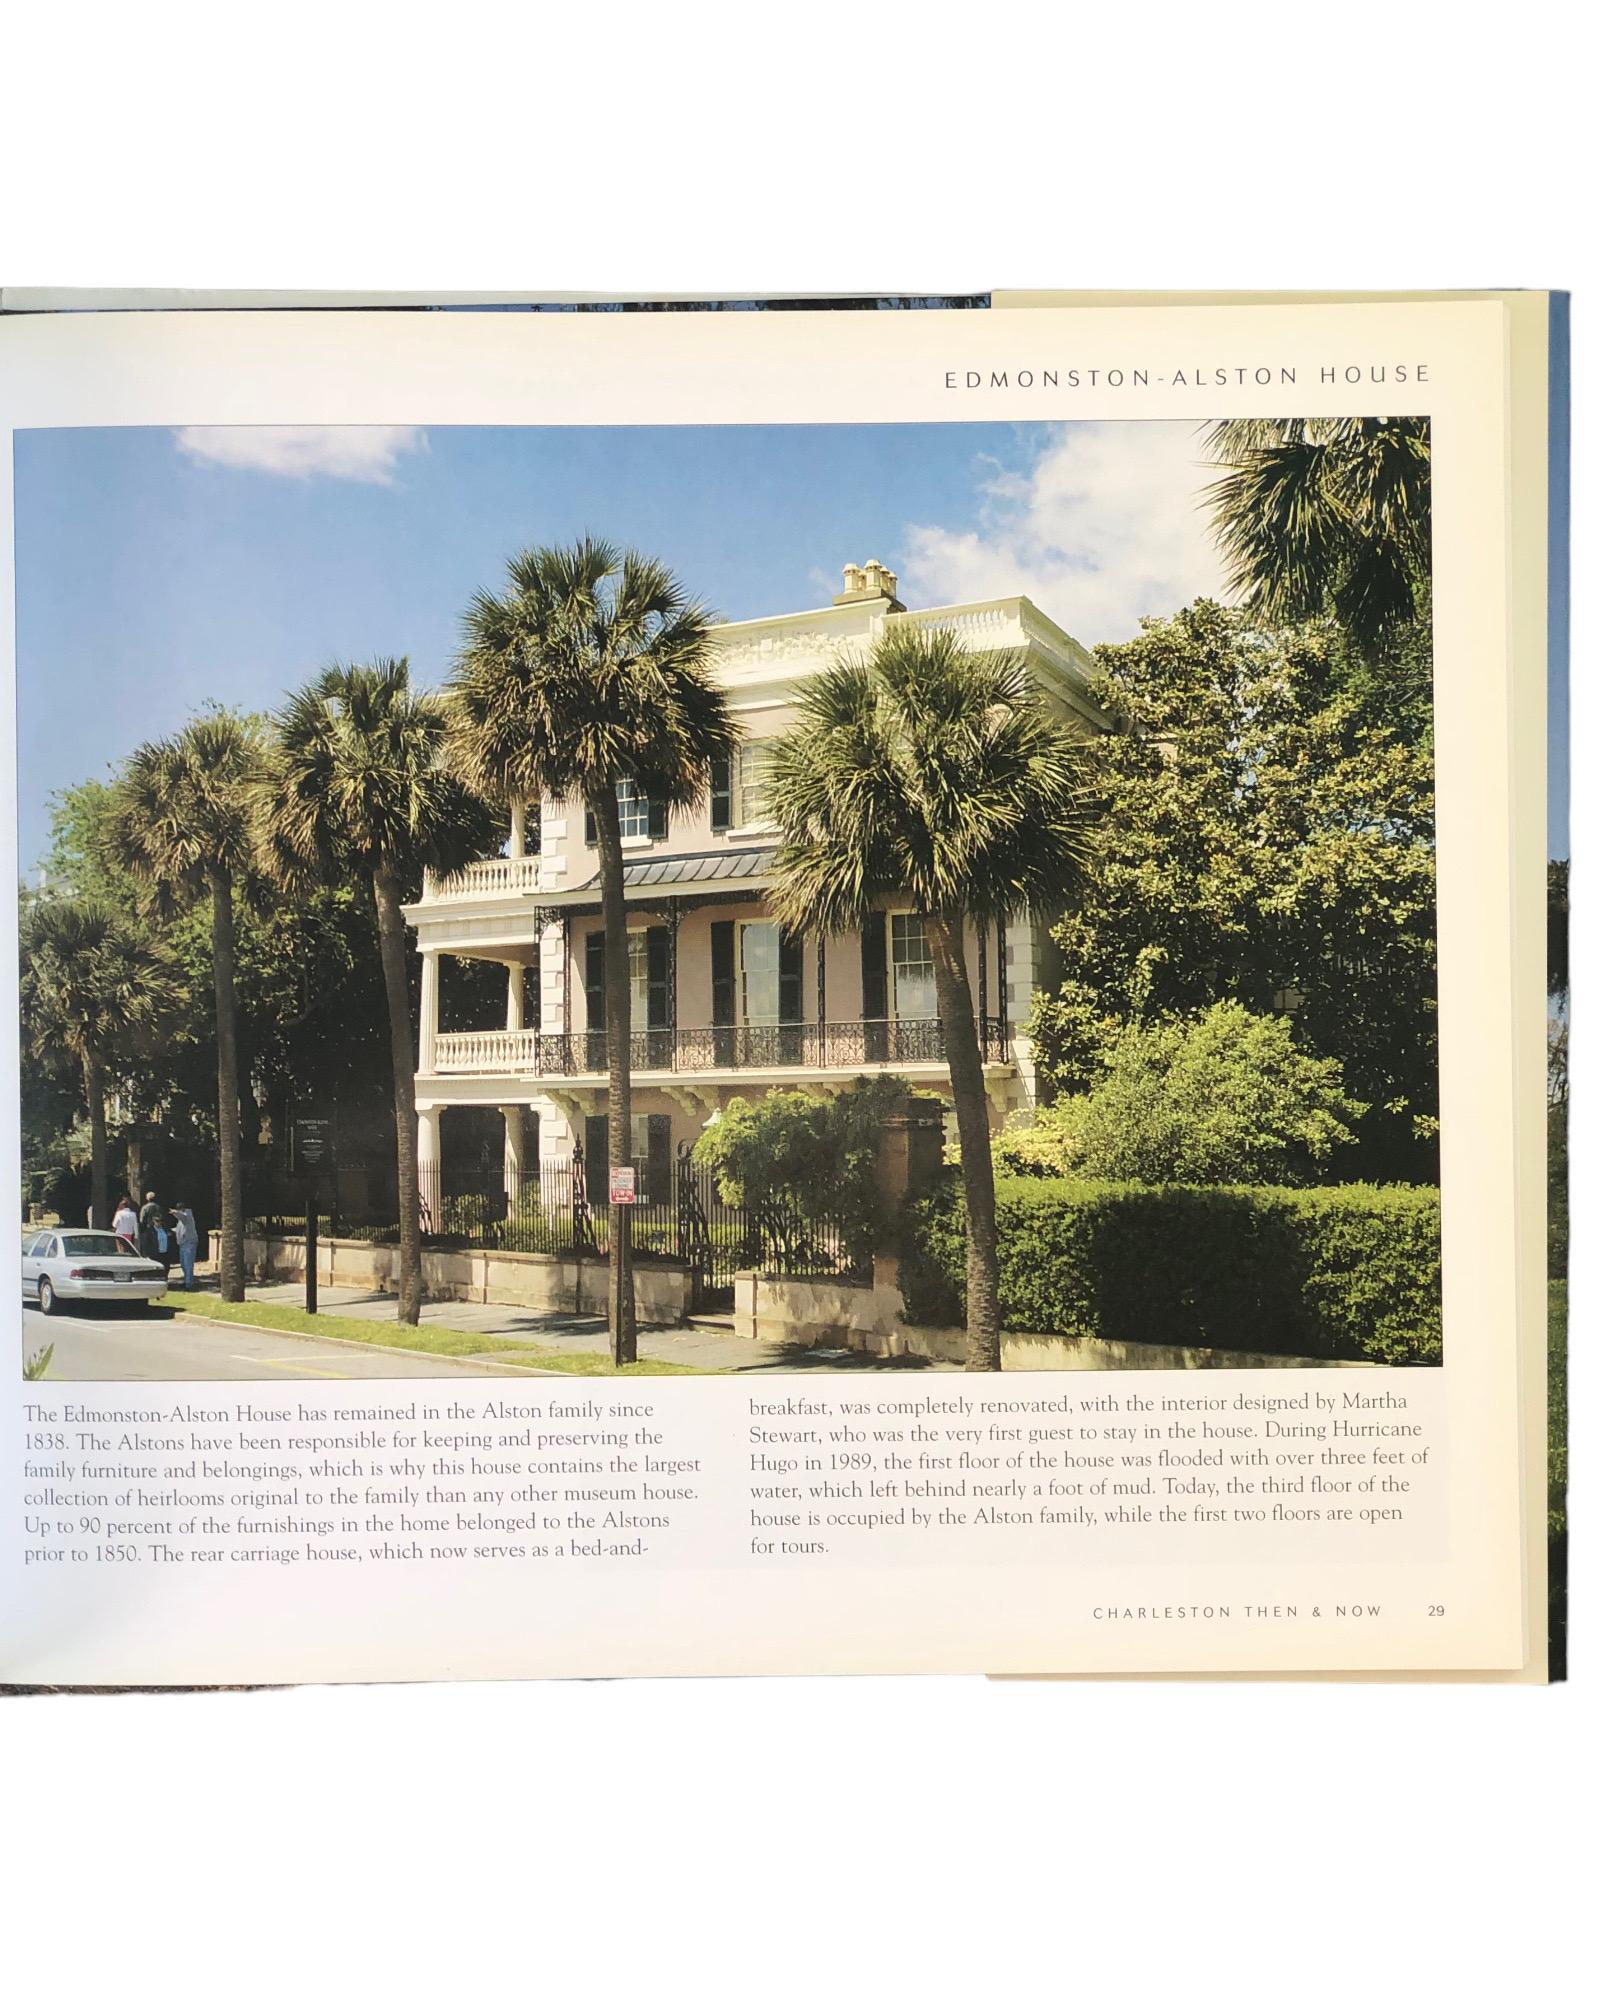 Contemporary Charleston, Then and Now by W. Chris Phelps For Sale